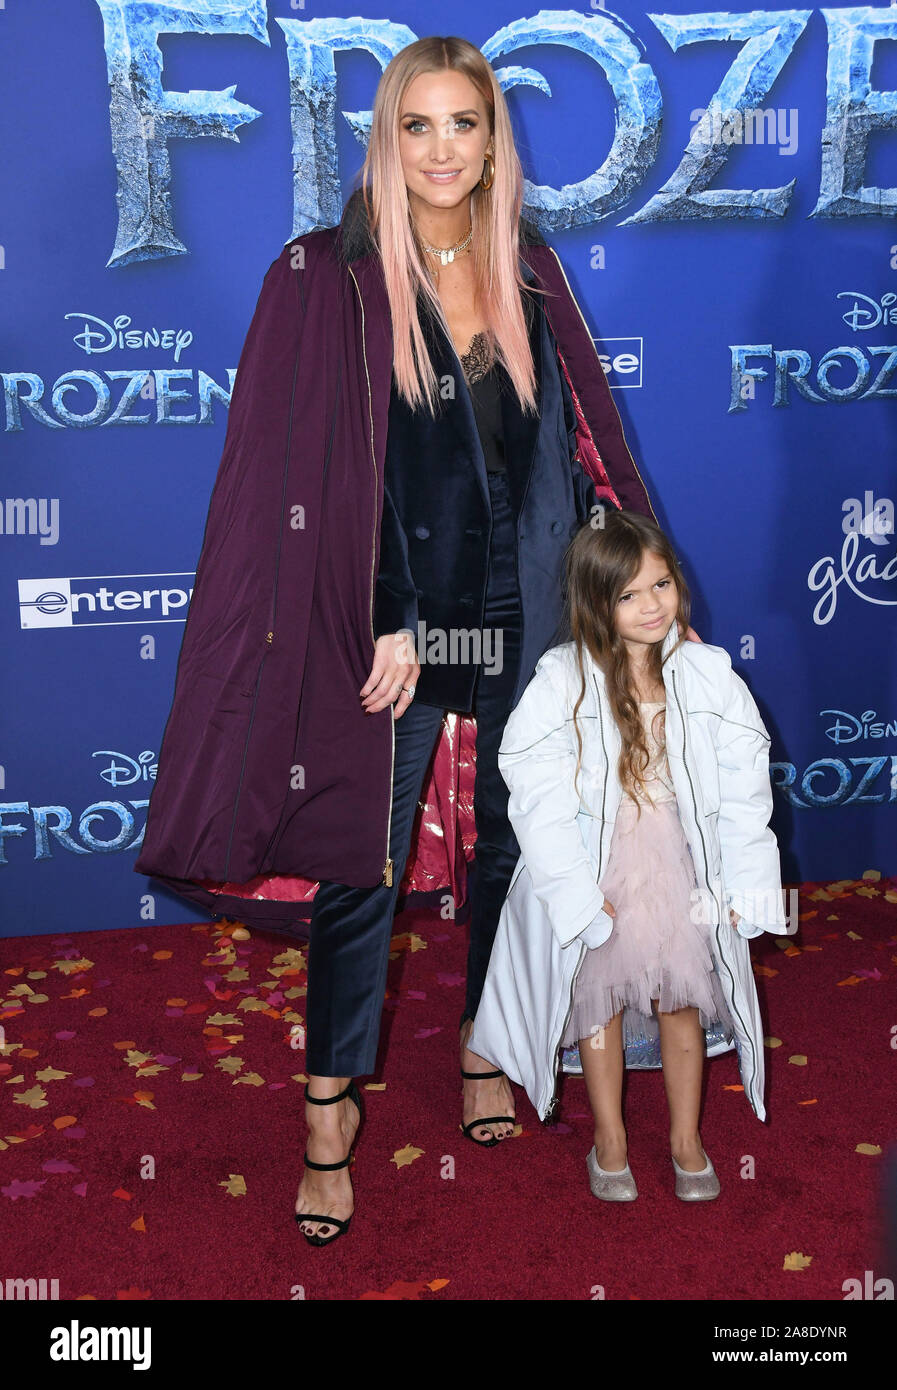 Hollywood, California, USA. 07th Nov, 2019. 07 November 2019 - Hollywood, California - Ashlee Simpson. Disney's 'Frozen 2' Los Angeles Premiere held at Dolby Theatre. Photo Credit: Birdie Thompson/AdMedia /MediaPunch Credit: MediaPunch Inc/Alamy Live News Stock Photo